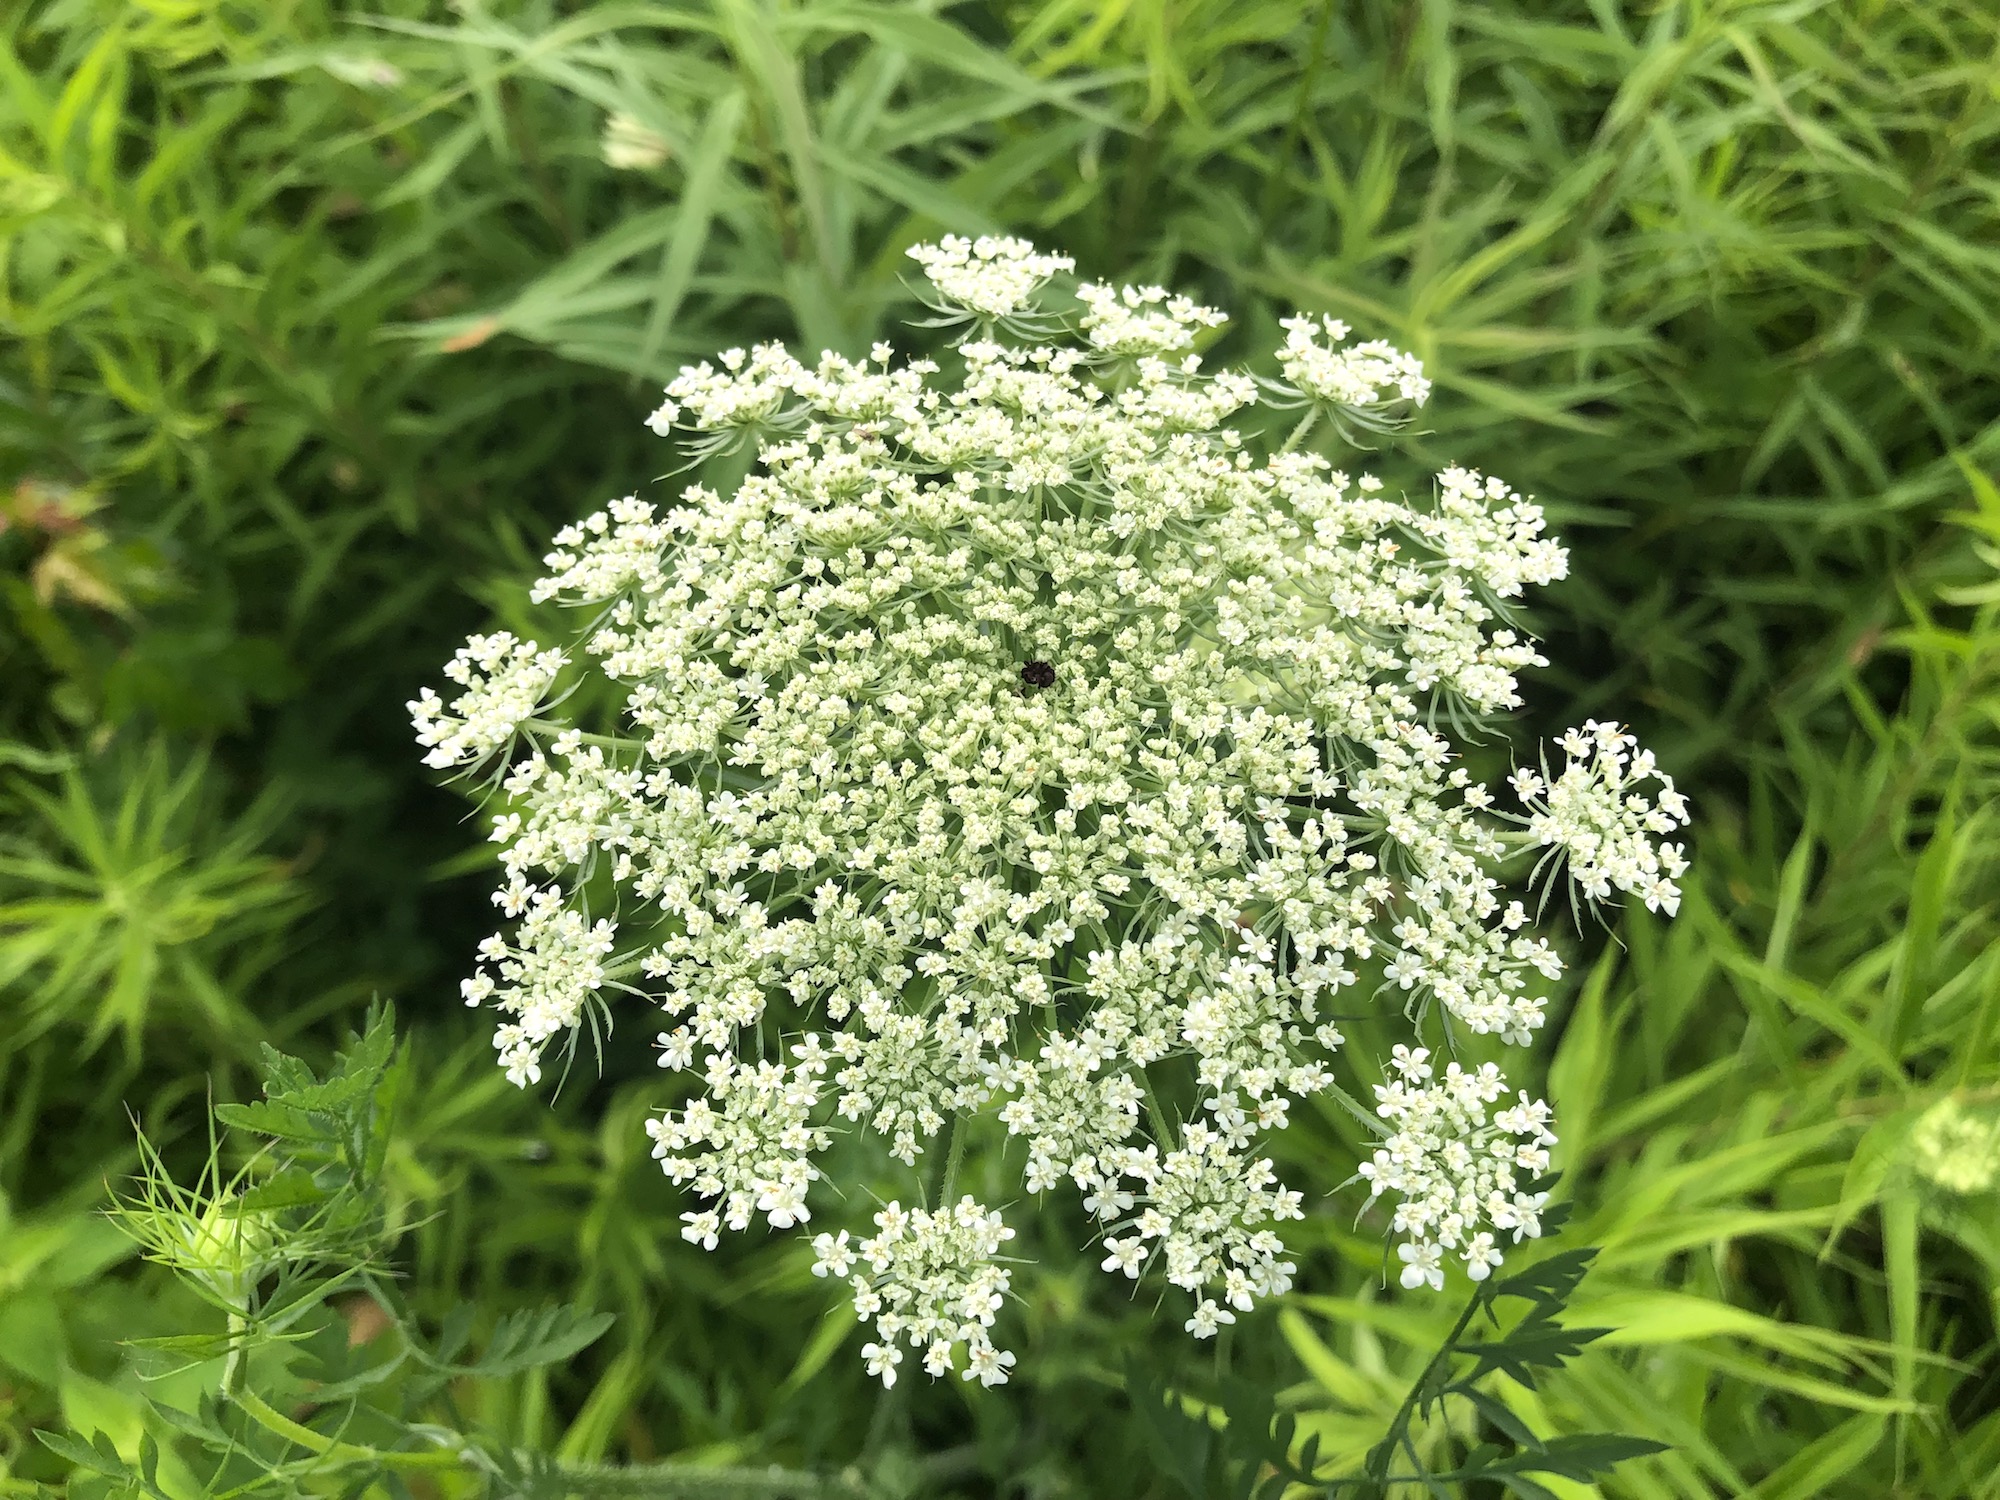 Queen Anne's Lace on bank of retaining pond on the corner of Nakoma Road and Manitou Way in Madison, WI on June 30, 2019.